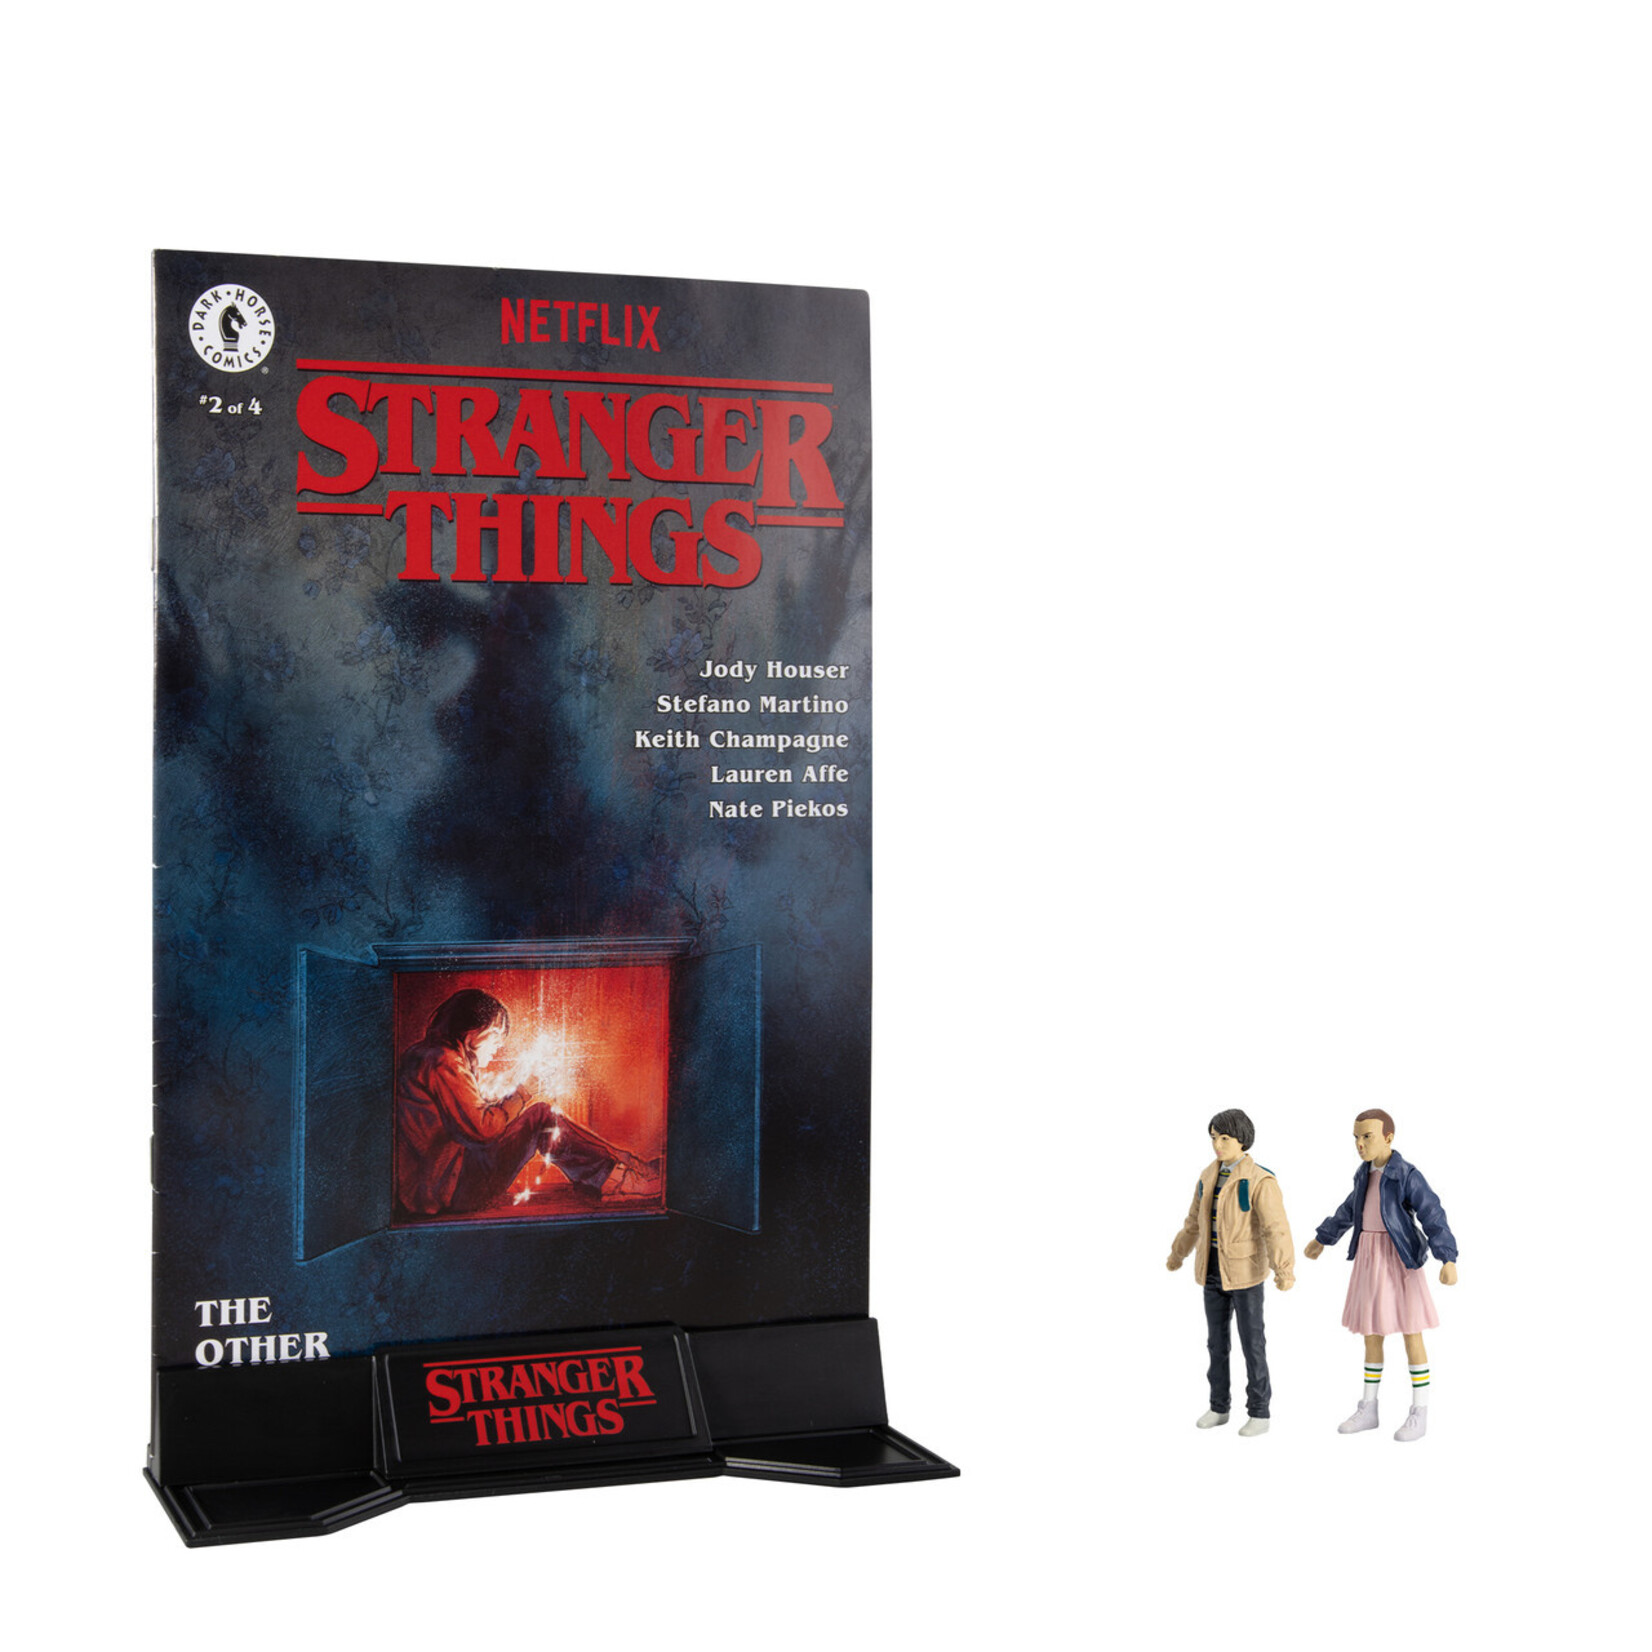 McFarlane Toys McFarlane Toys Stranger Things Page Punchers Action Figures & Comic Book Eleven and Mike Wheeler 8 cm